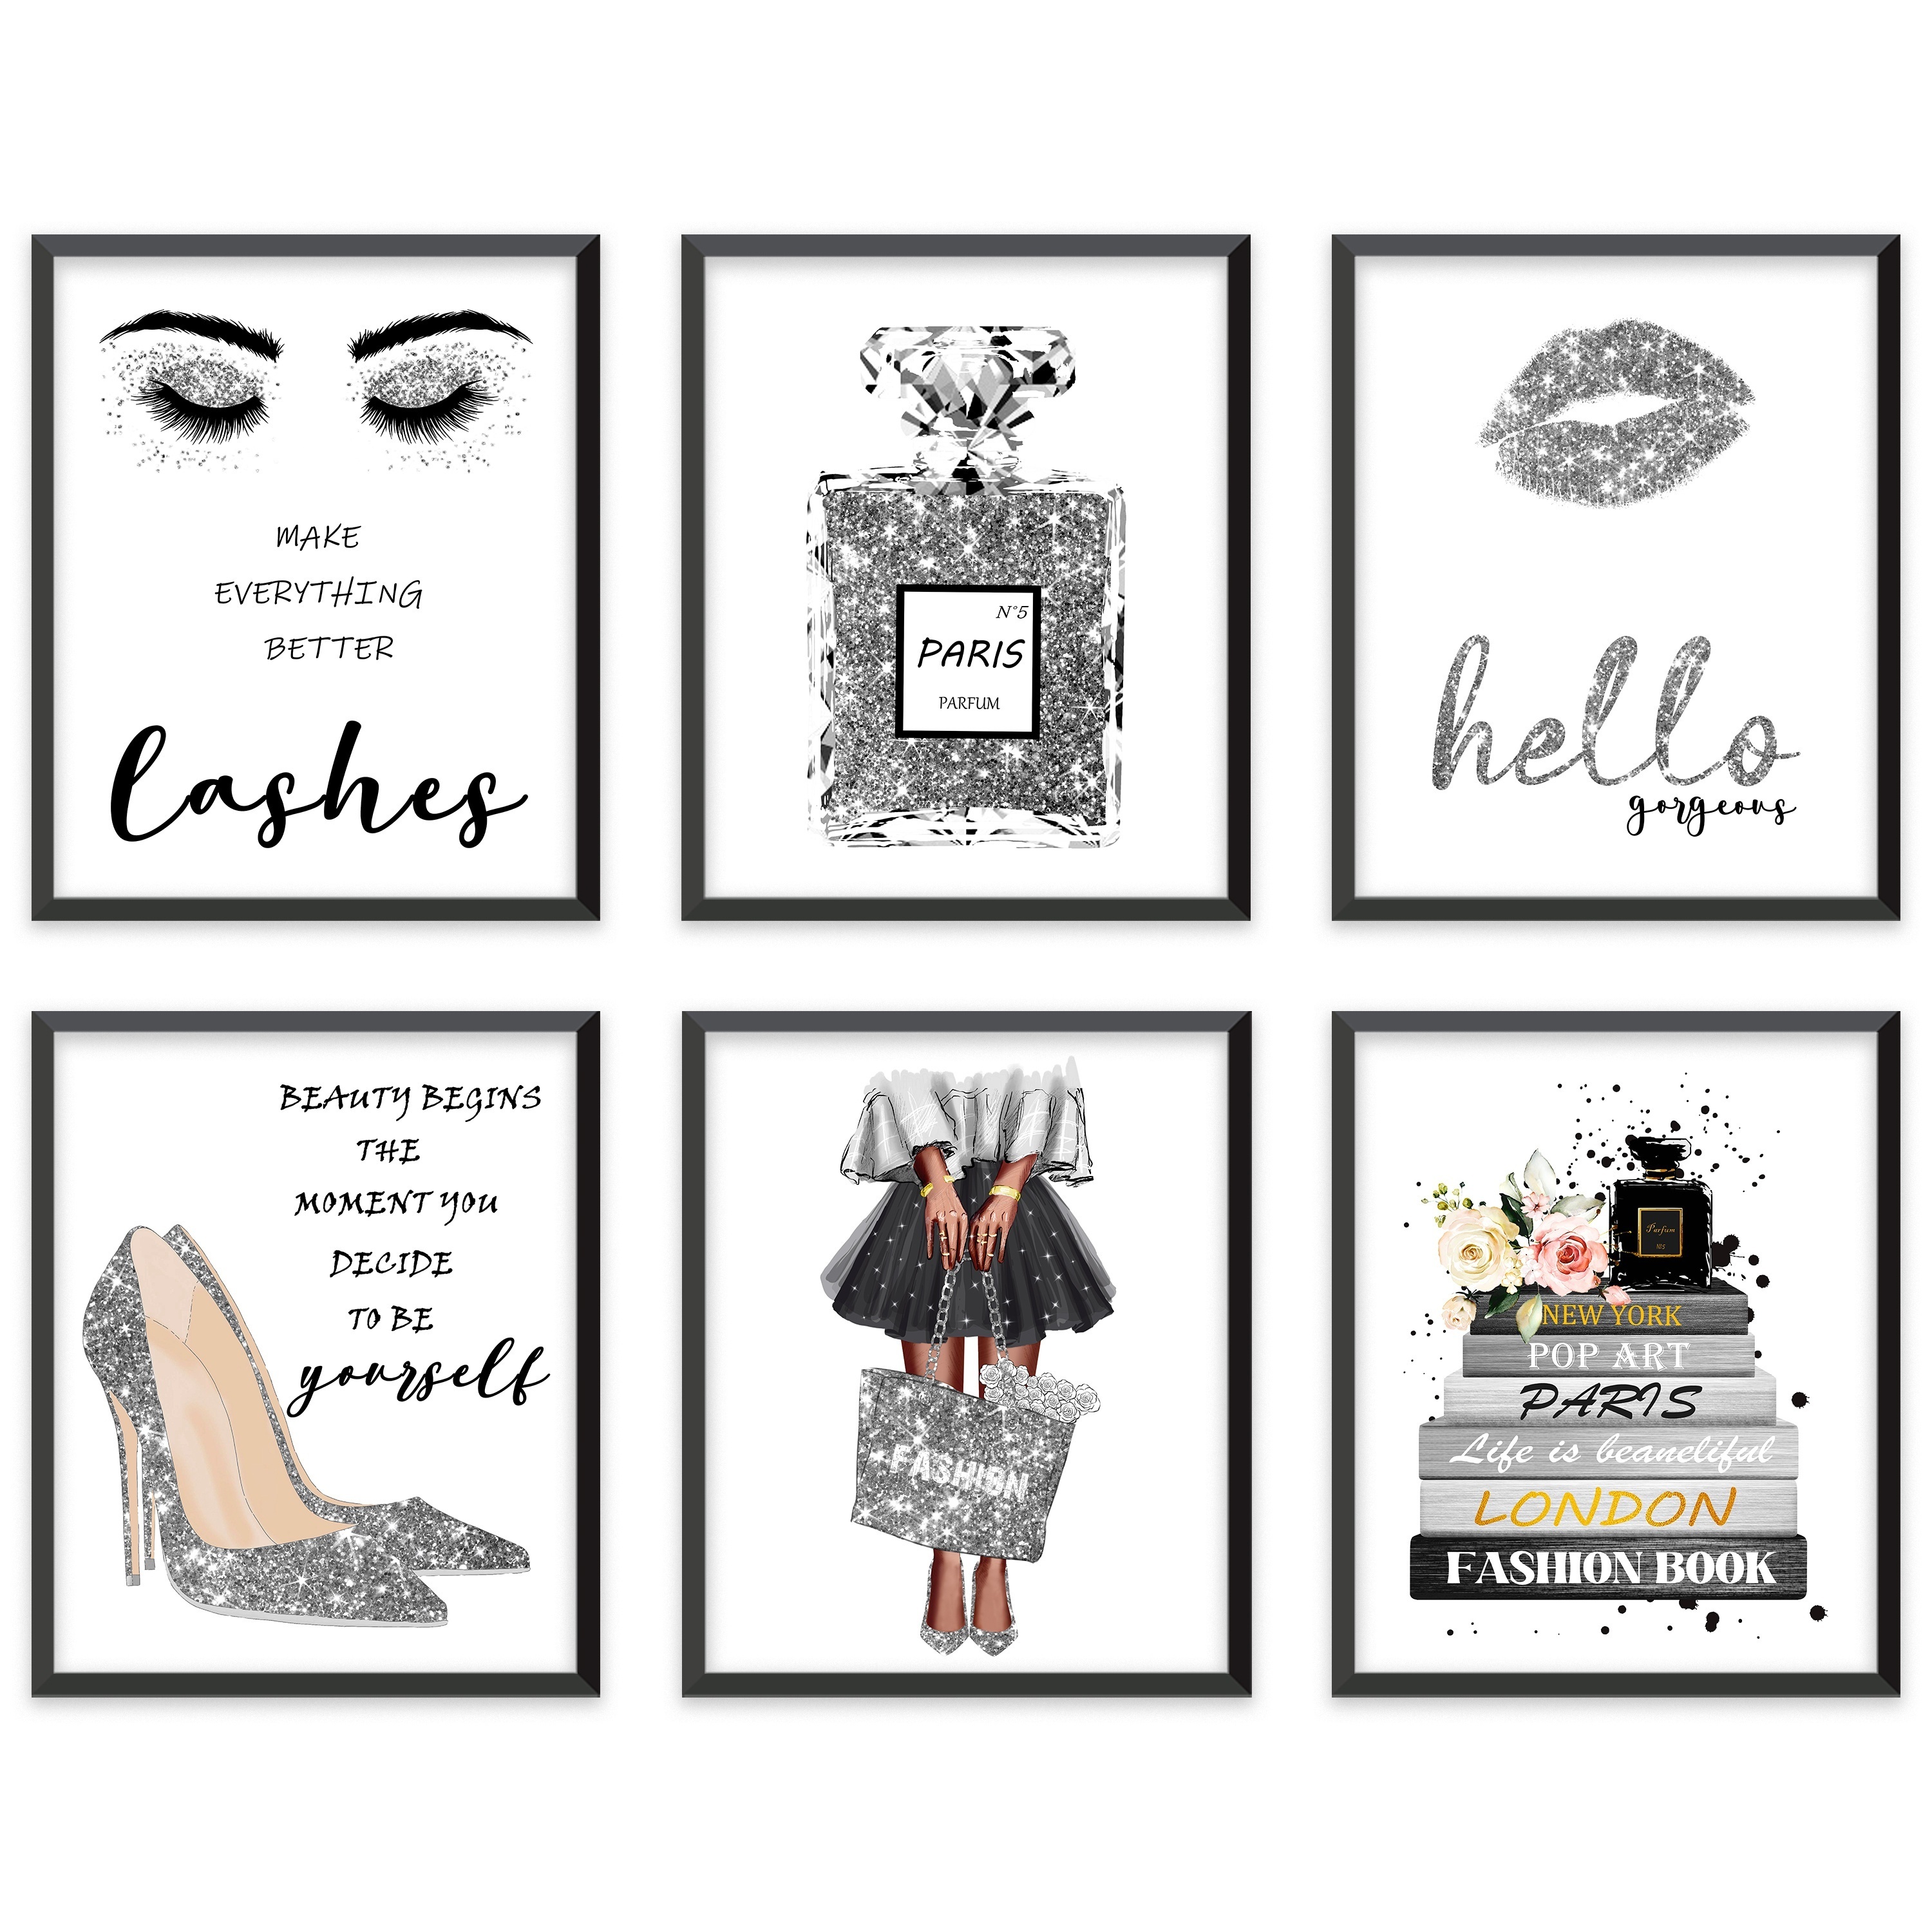 Buy Fashion Quote Decorative Book Set, Beauty Begins the Moment